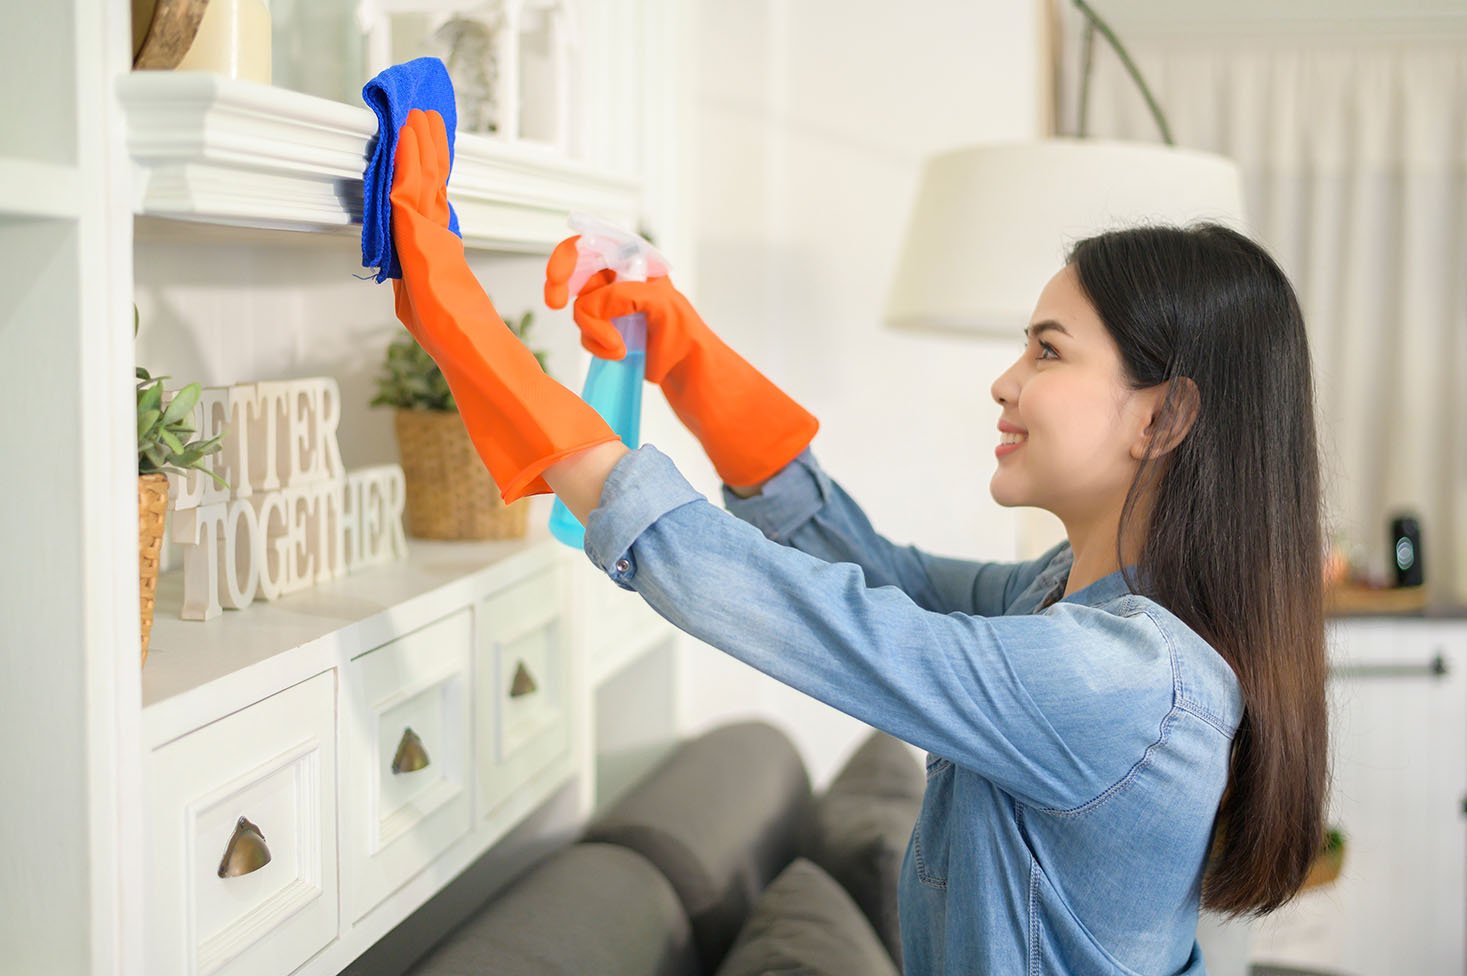 House cleaning service hackensack nj.